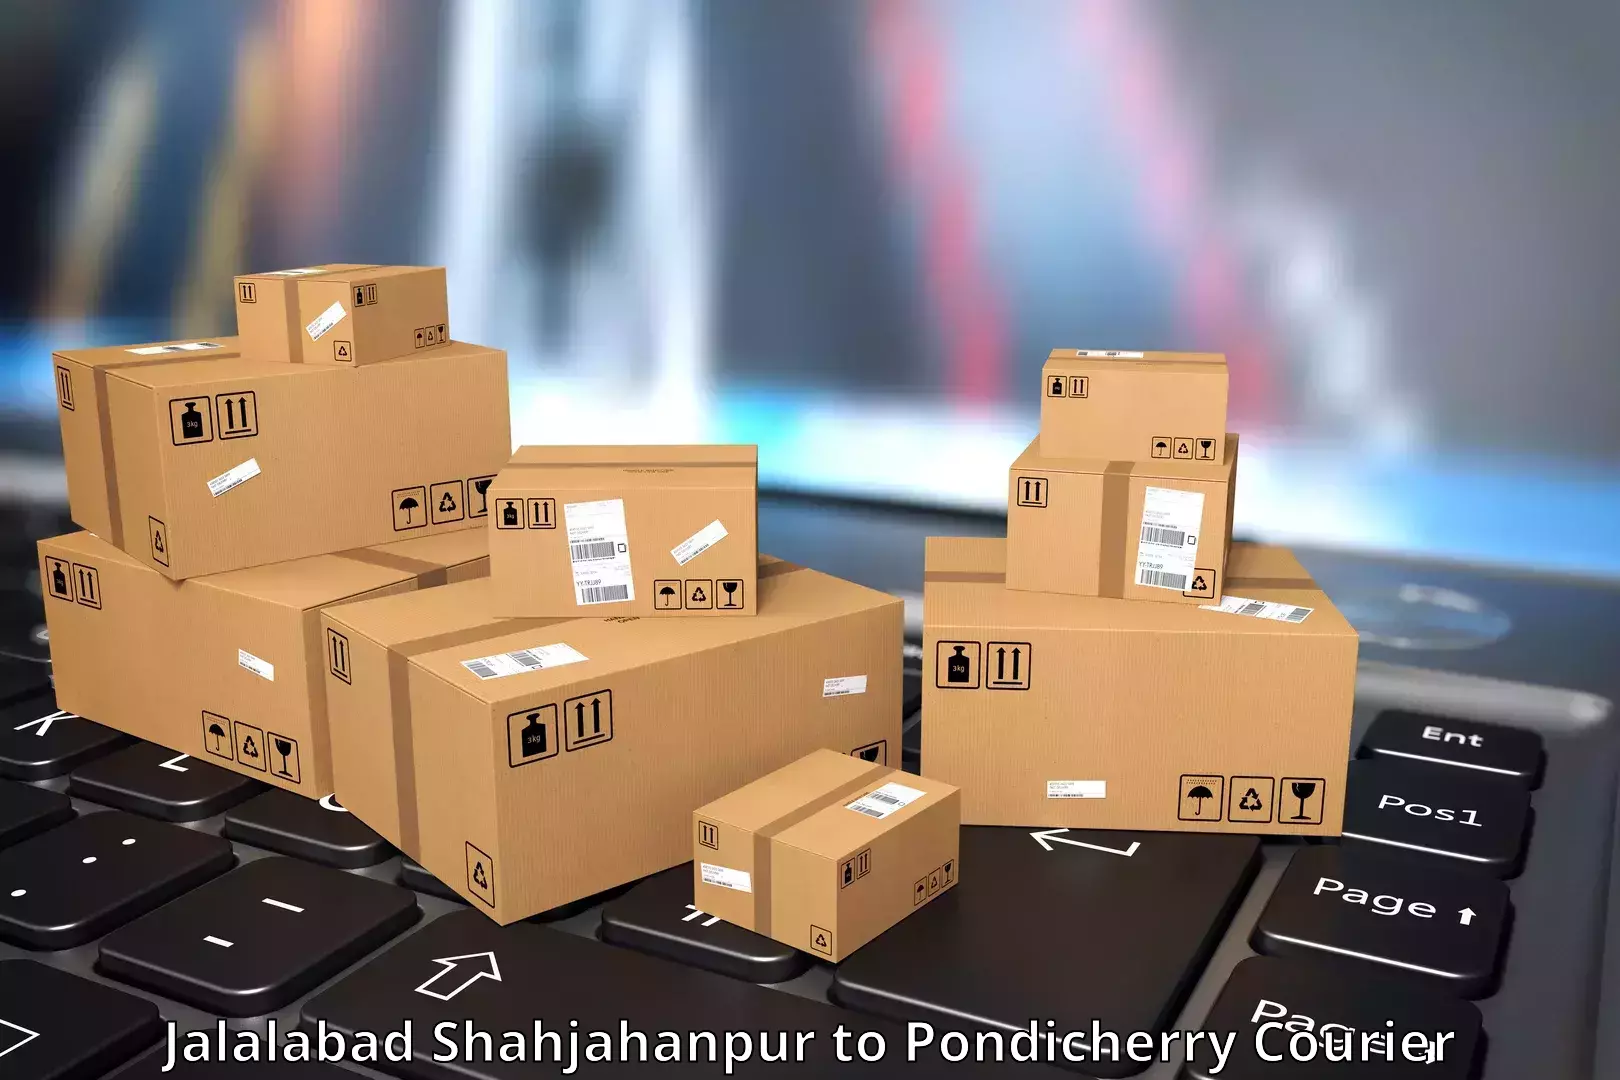 24-hour courier service Jalalabad Shahjahanpur to Pondicherry